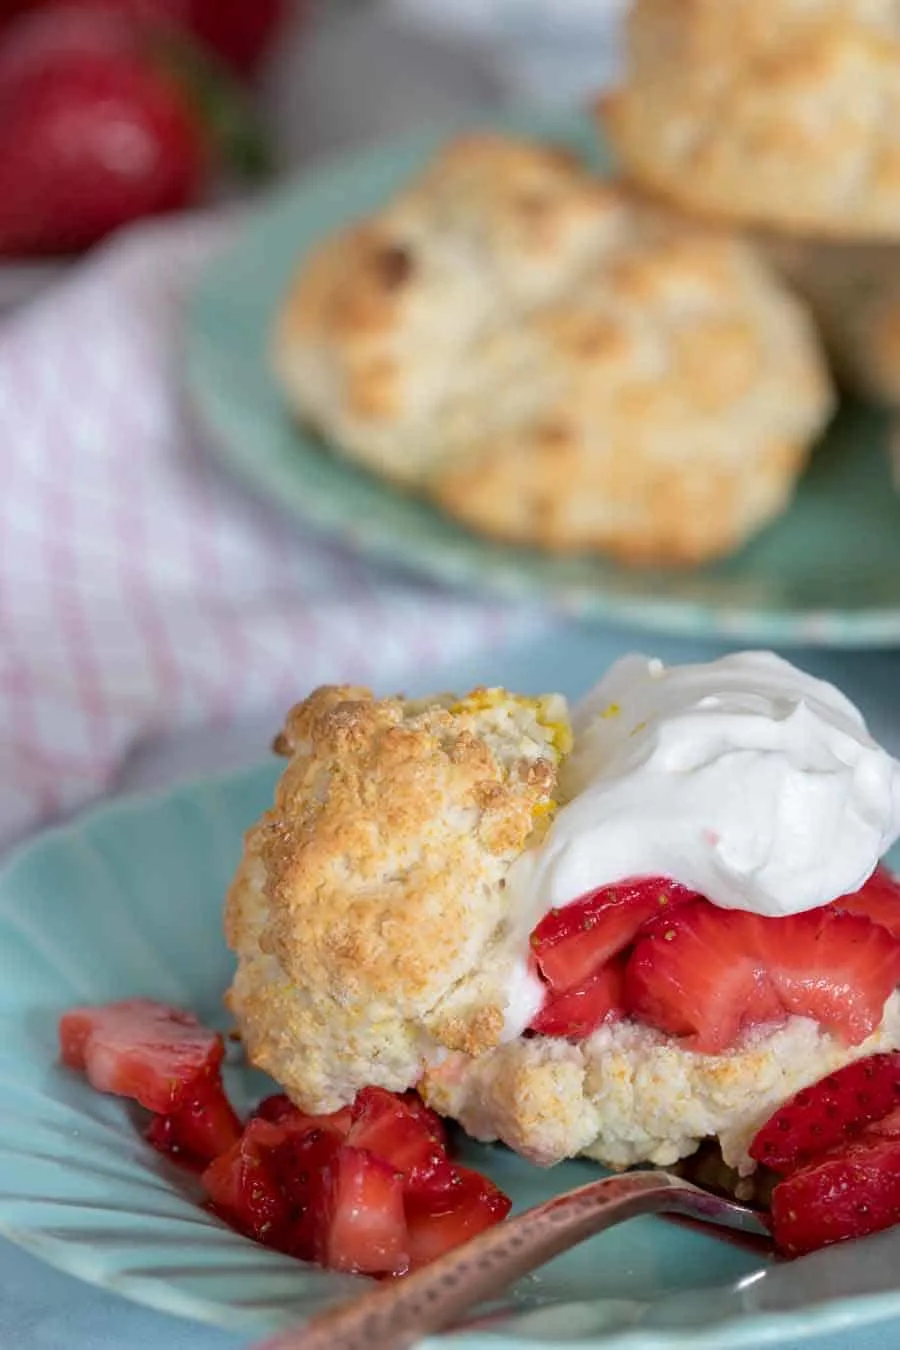 Is there anything more delicious than homemade strawberry shortcake?! I've lightened up this classic and tasty dessert to make it Weight Watchers friendly! I love making all of my favorite recipes a little more healthy. This one in particular is a delicious treat (and one of my person favorites)! 